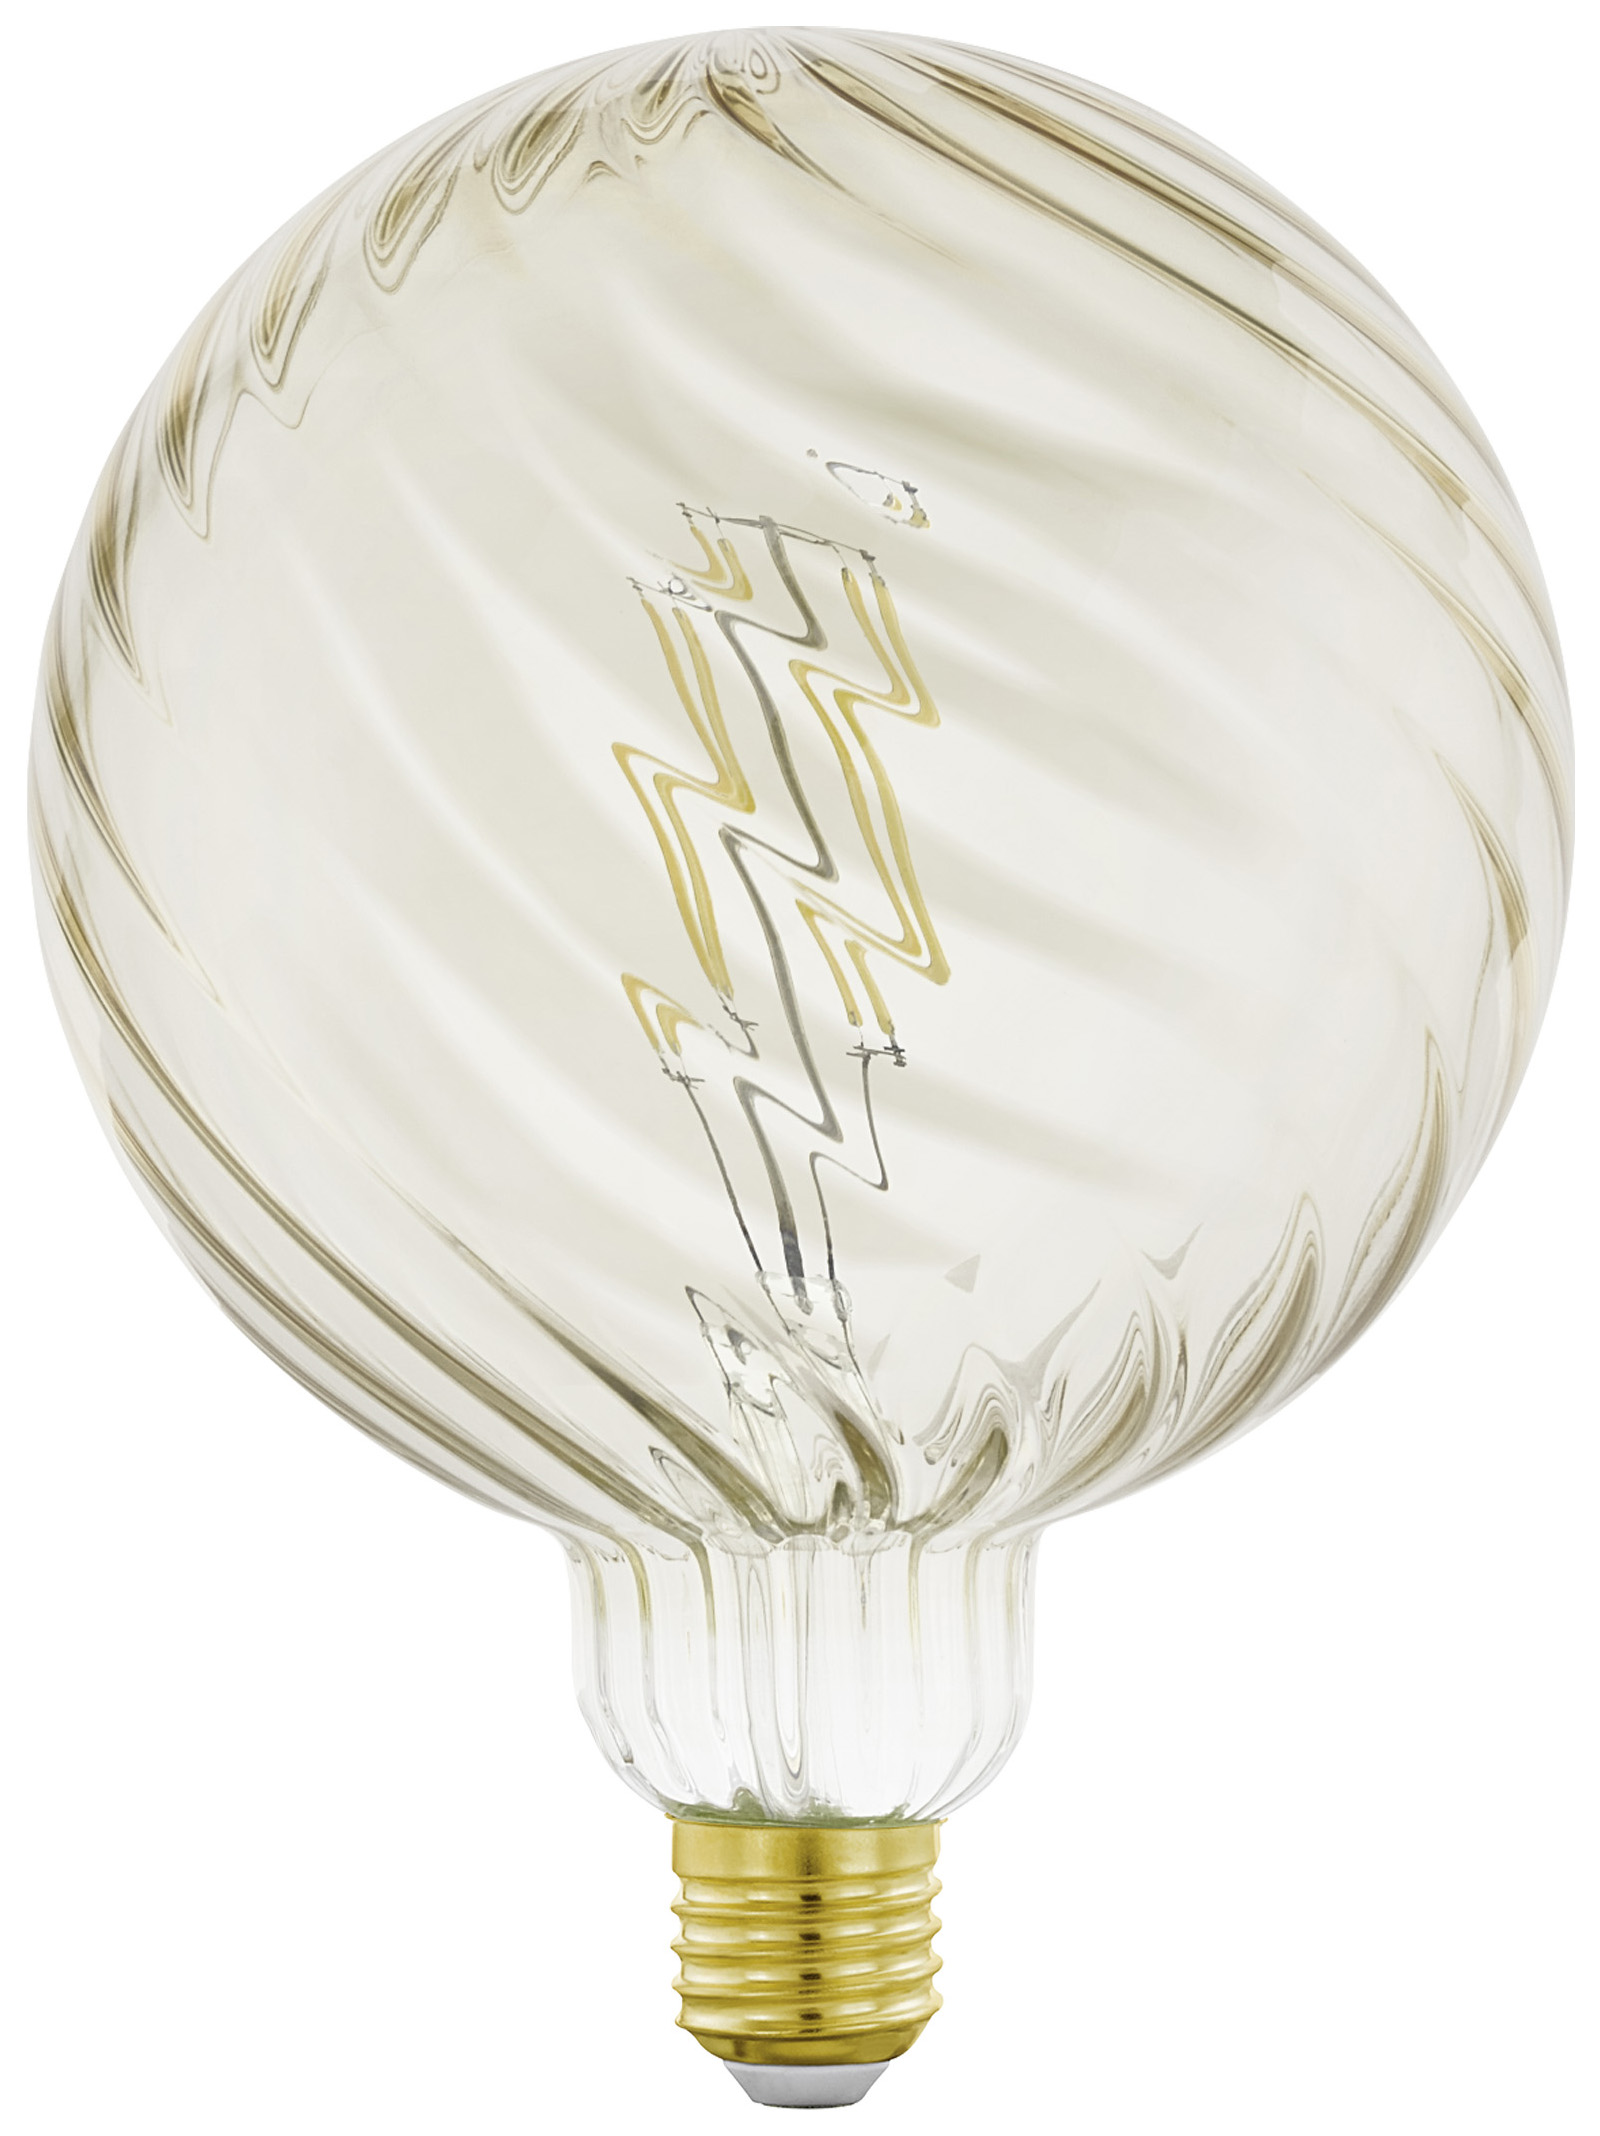 Image of Eglo LED Dimmable Globe Filament G150 Amber Light Bulb - 2.5W